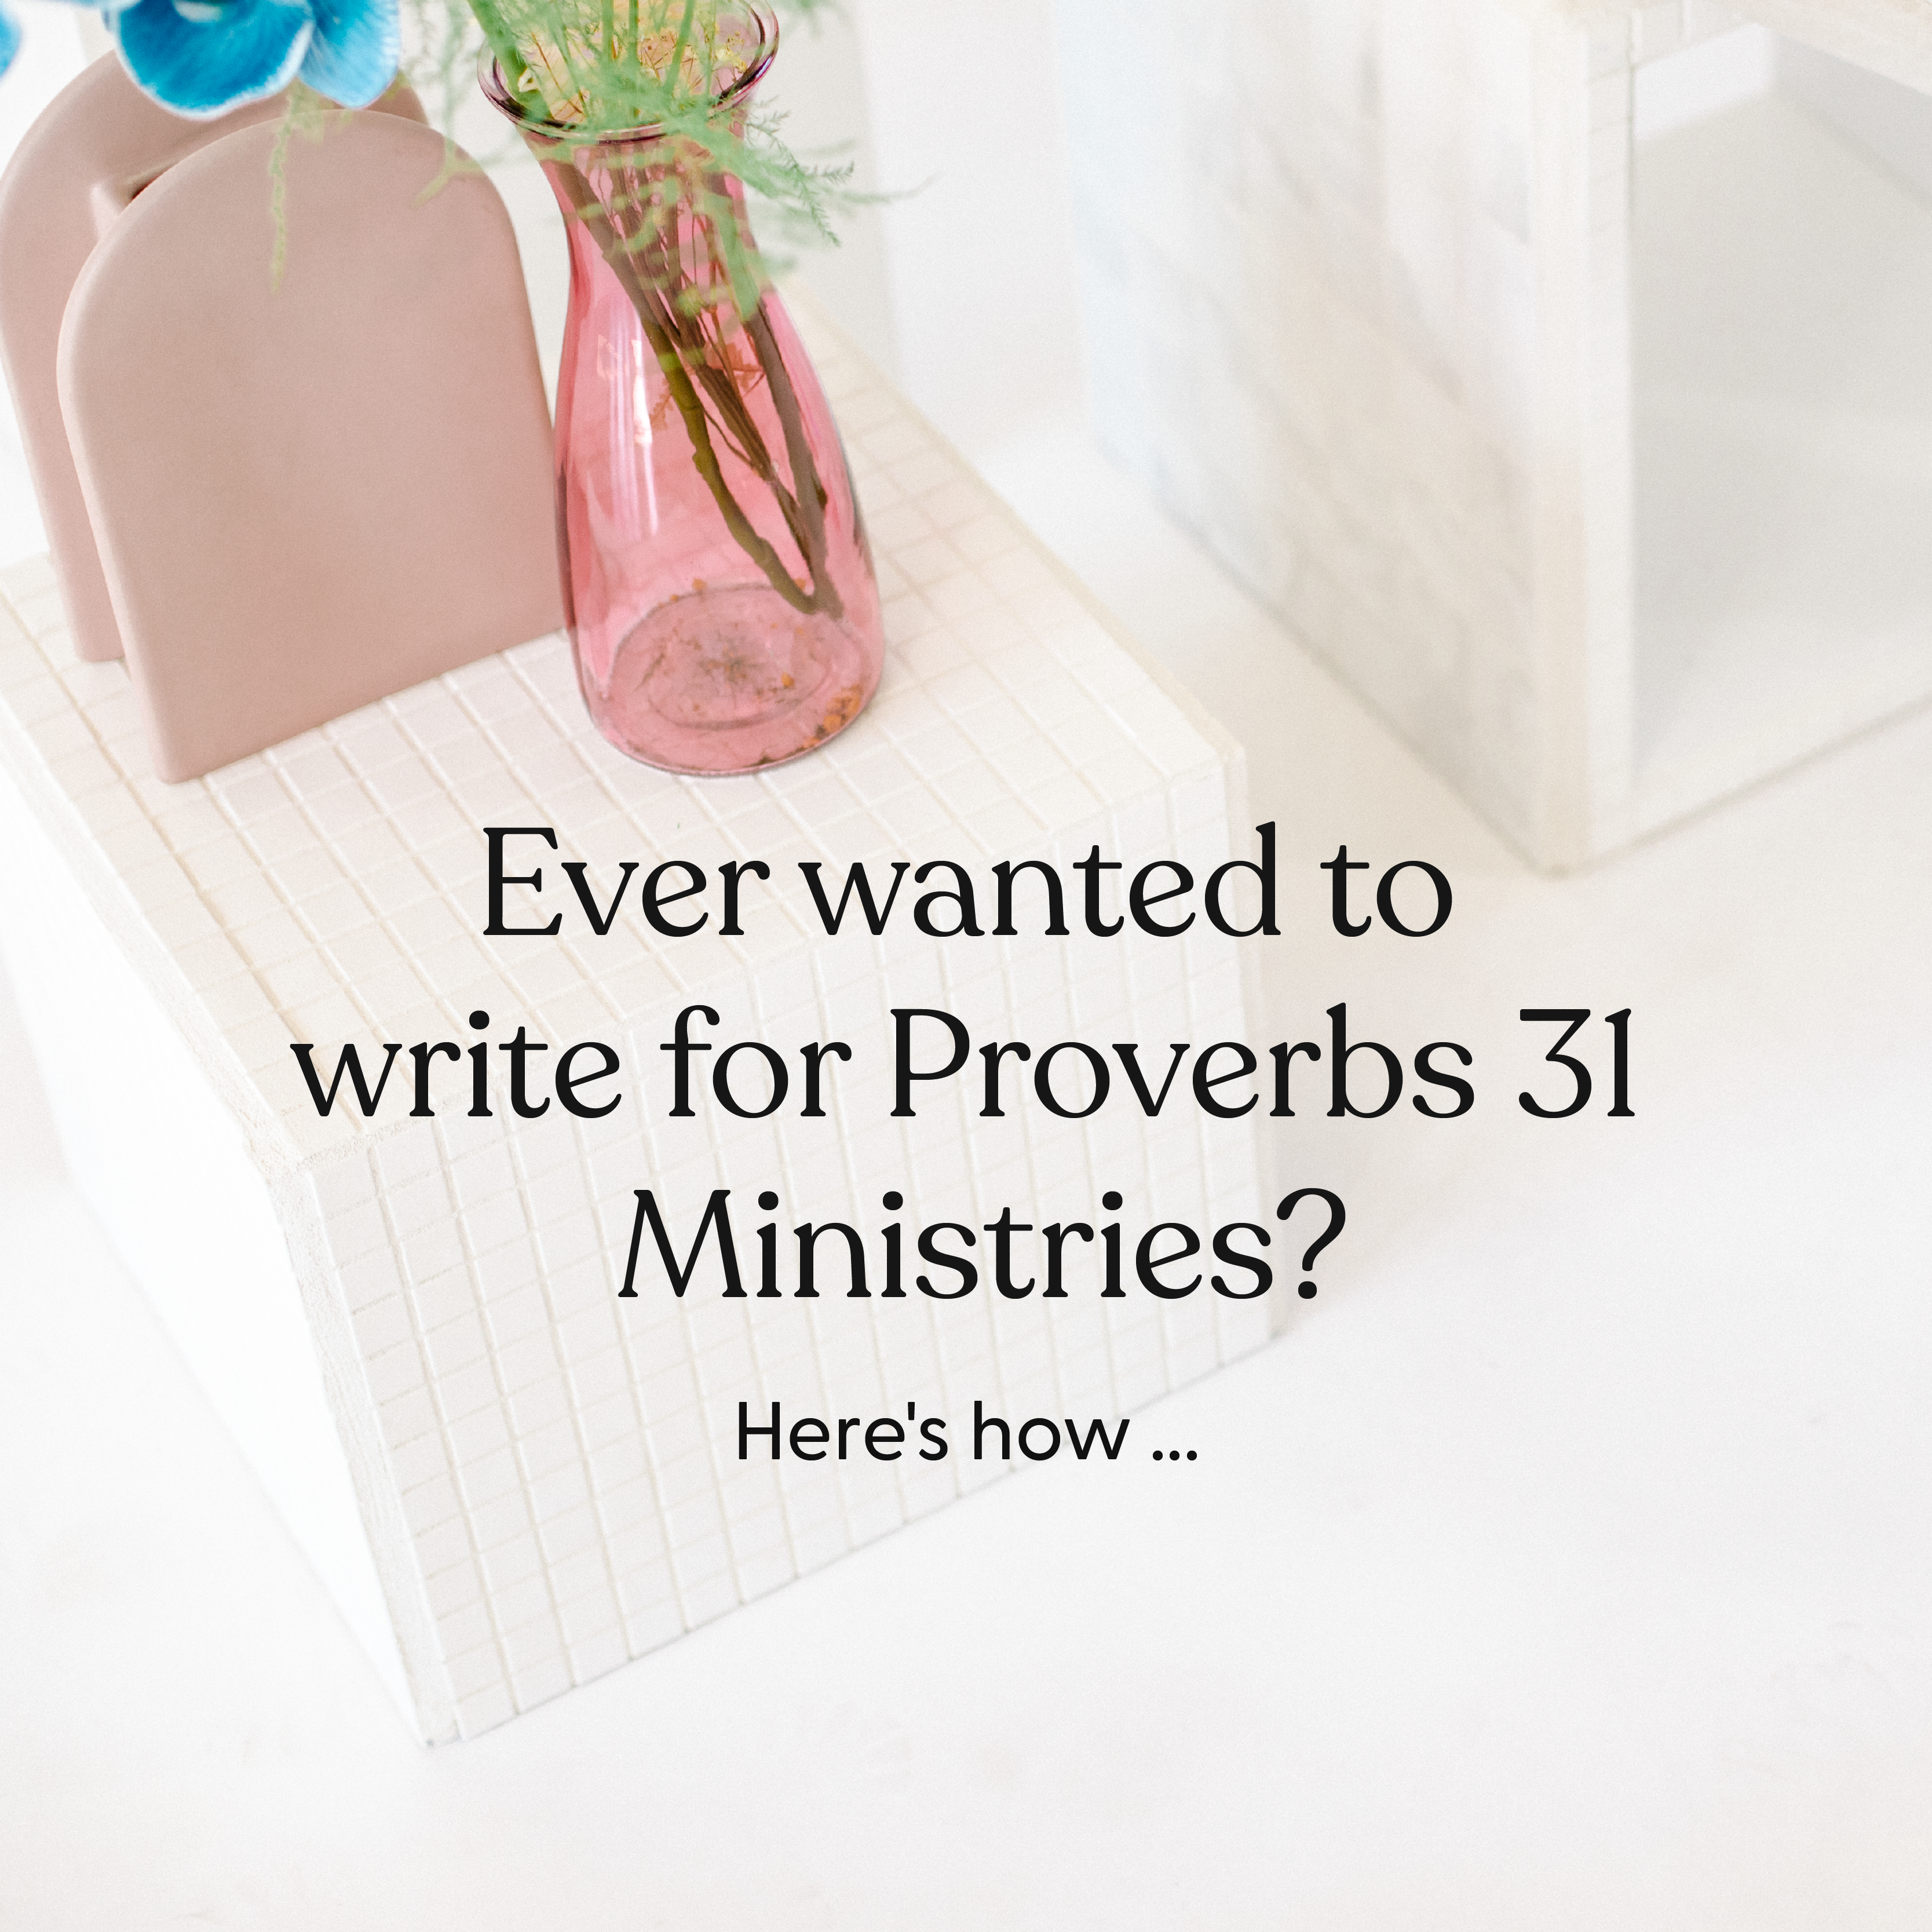 Ever wanted to write for Proverbs 31 Ministries? Here's how...